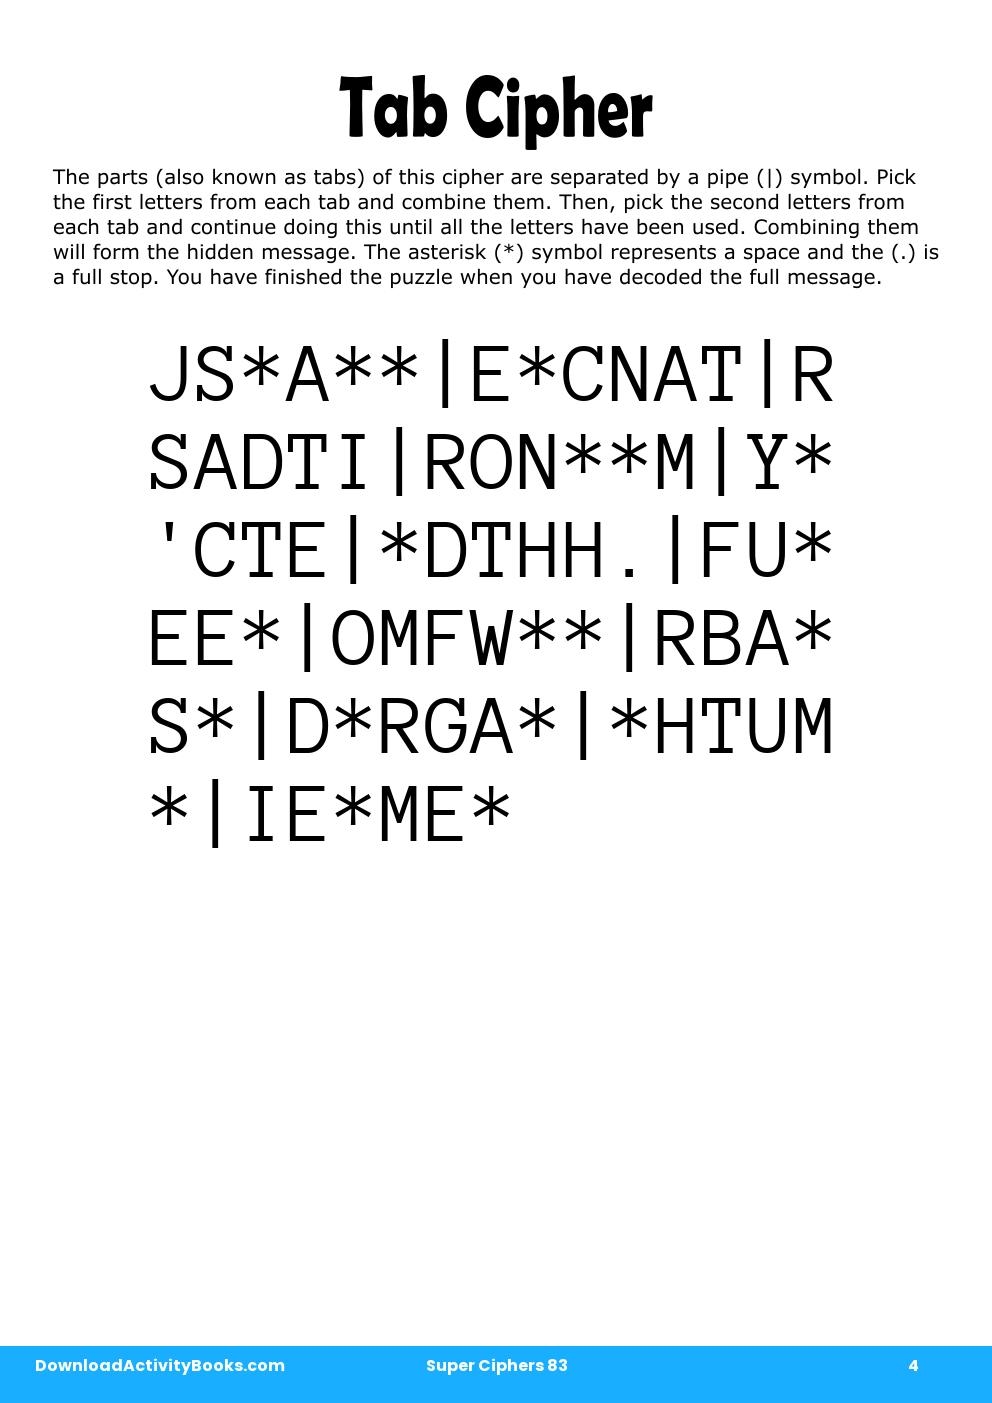 Tab Cipher in Super Ciphers 83